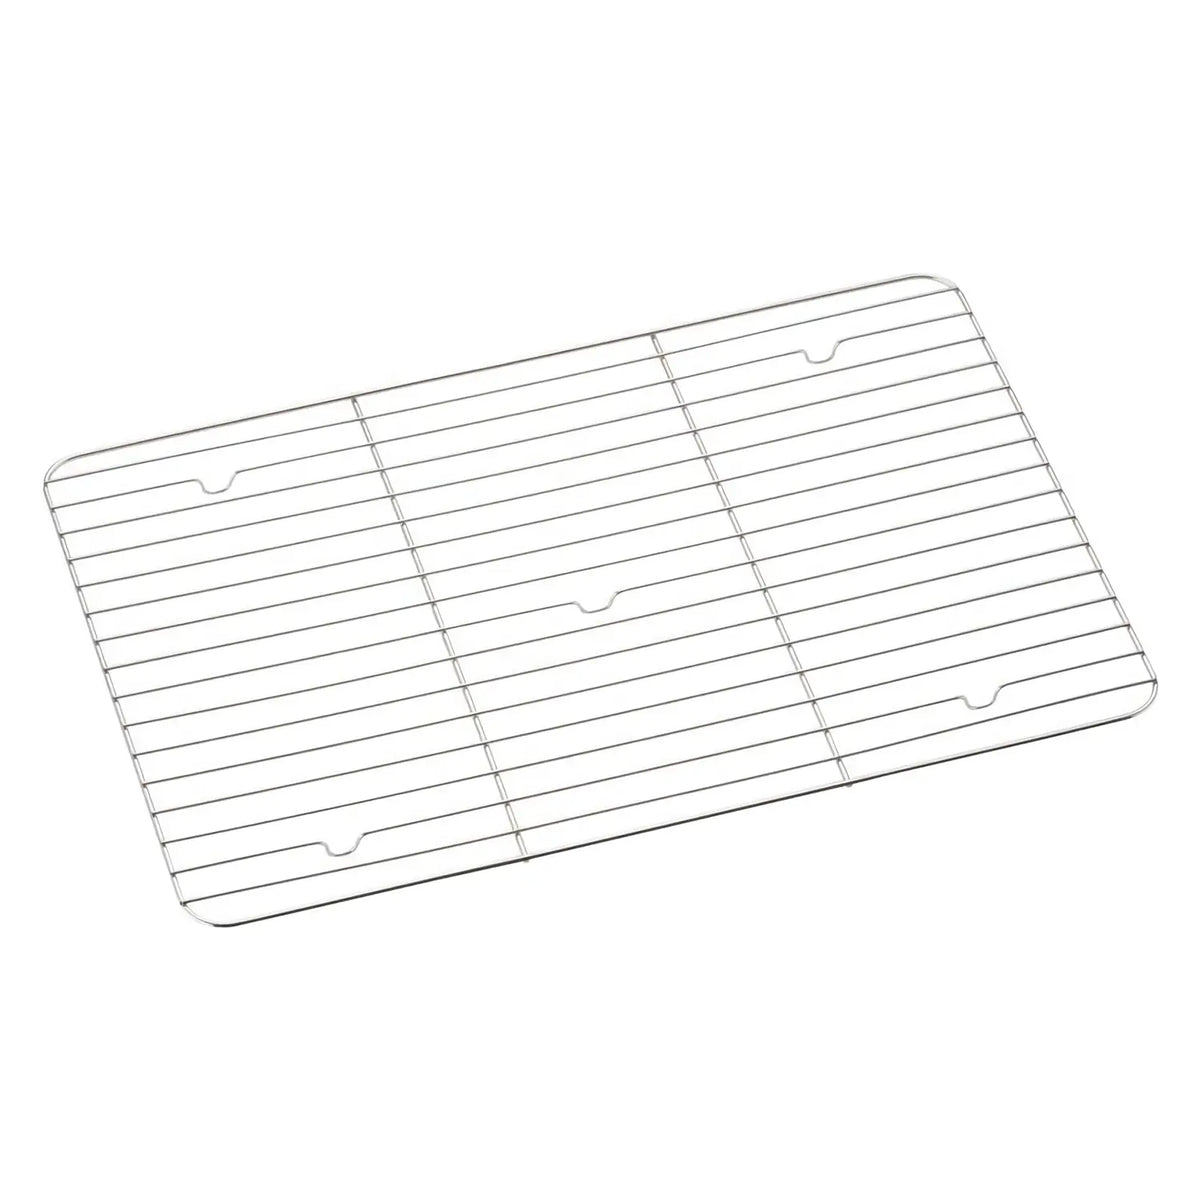 SHINDO Stainless Steel Cooling Rack